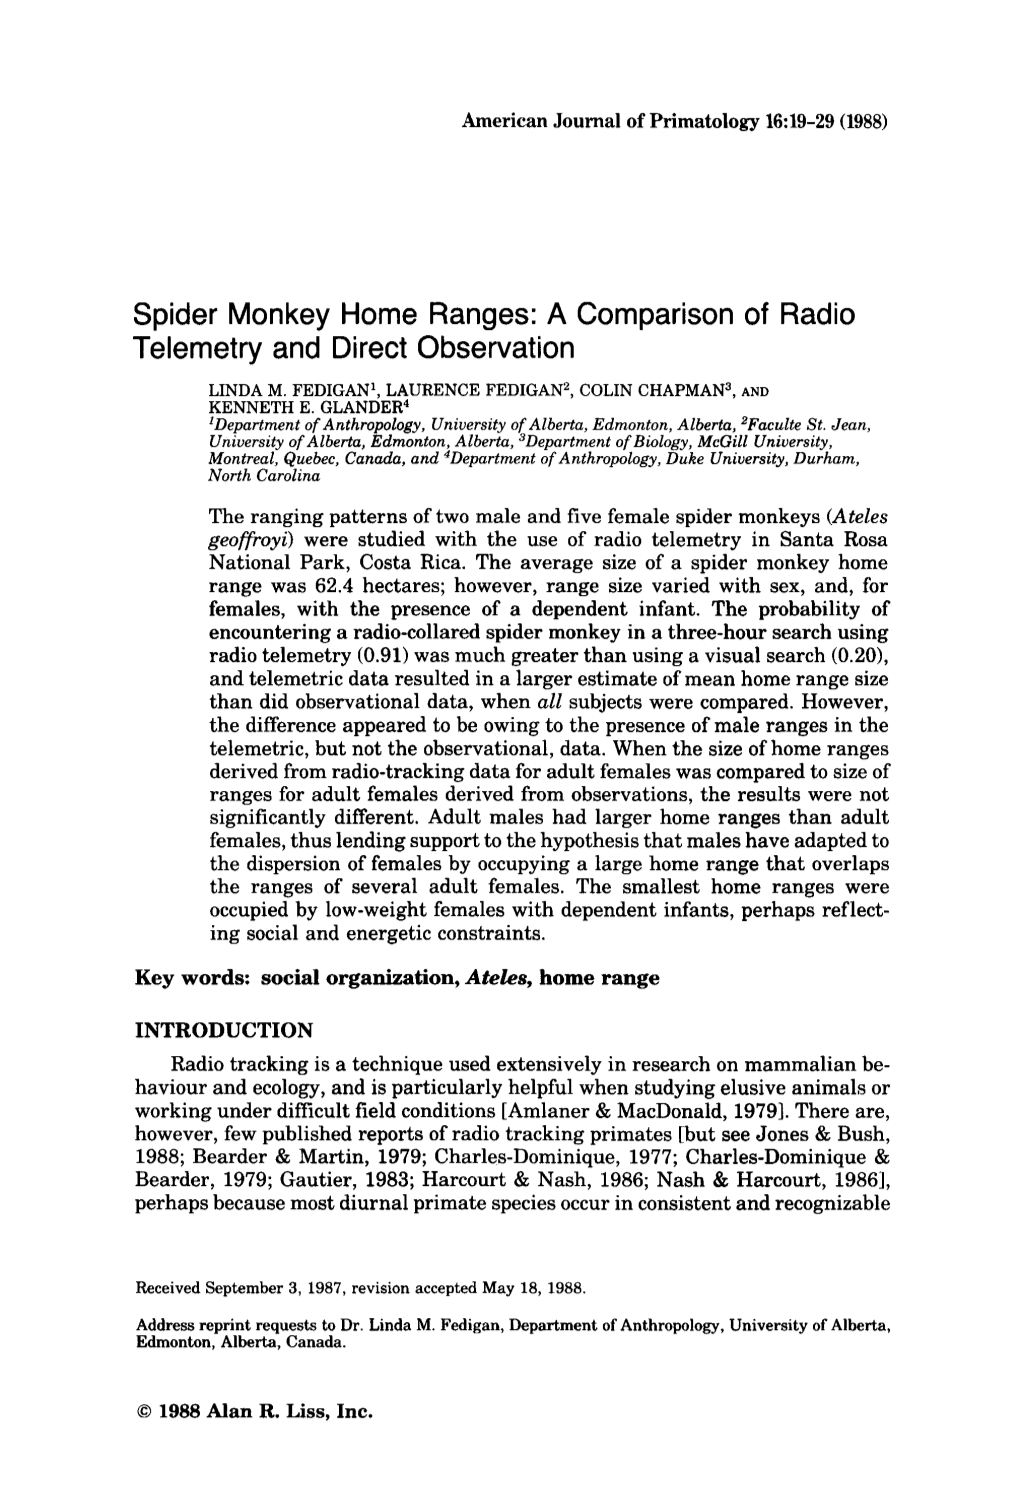 Spider Monkey Home Ranges: a Comparison of Radio Telemetry and Direct Observation